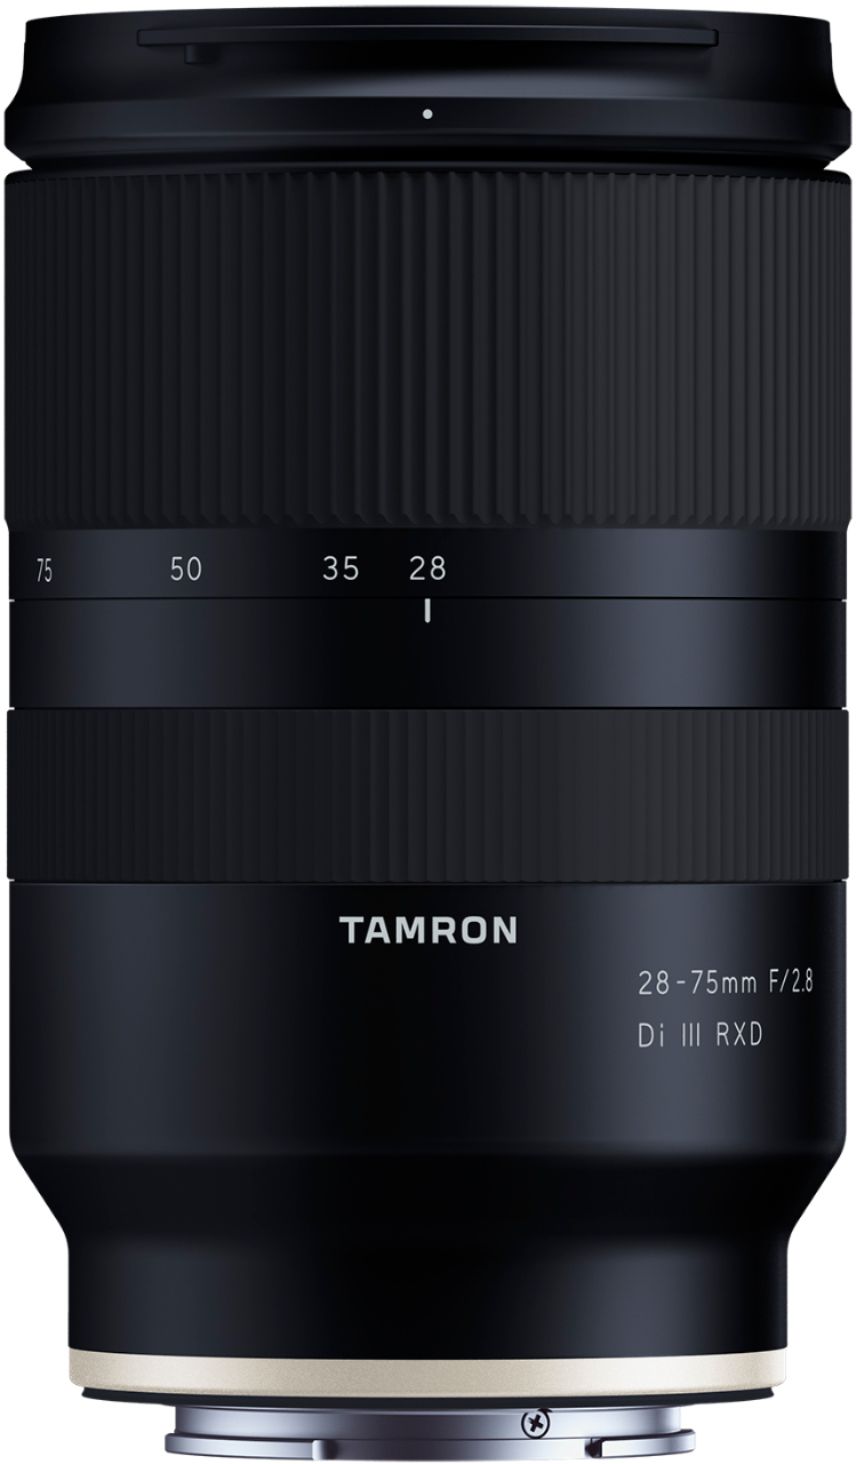 Best Buy: Tamron 28-75mm f/2.8 DI III RXD Zoom Lens for Sony E 